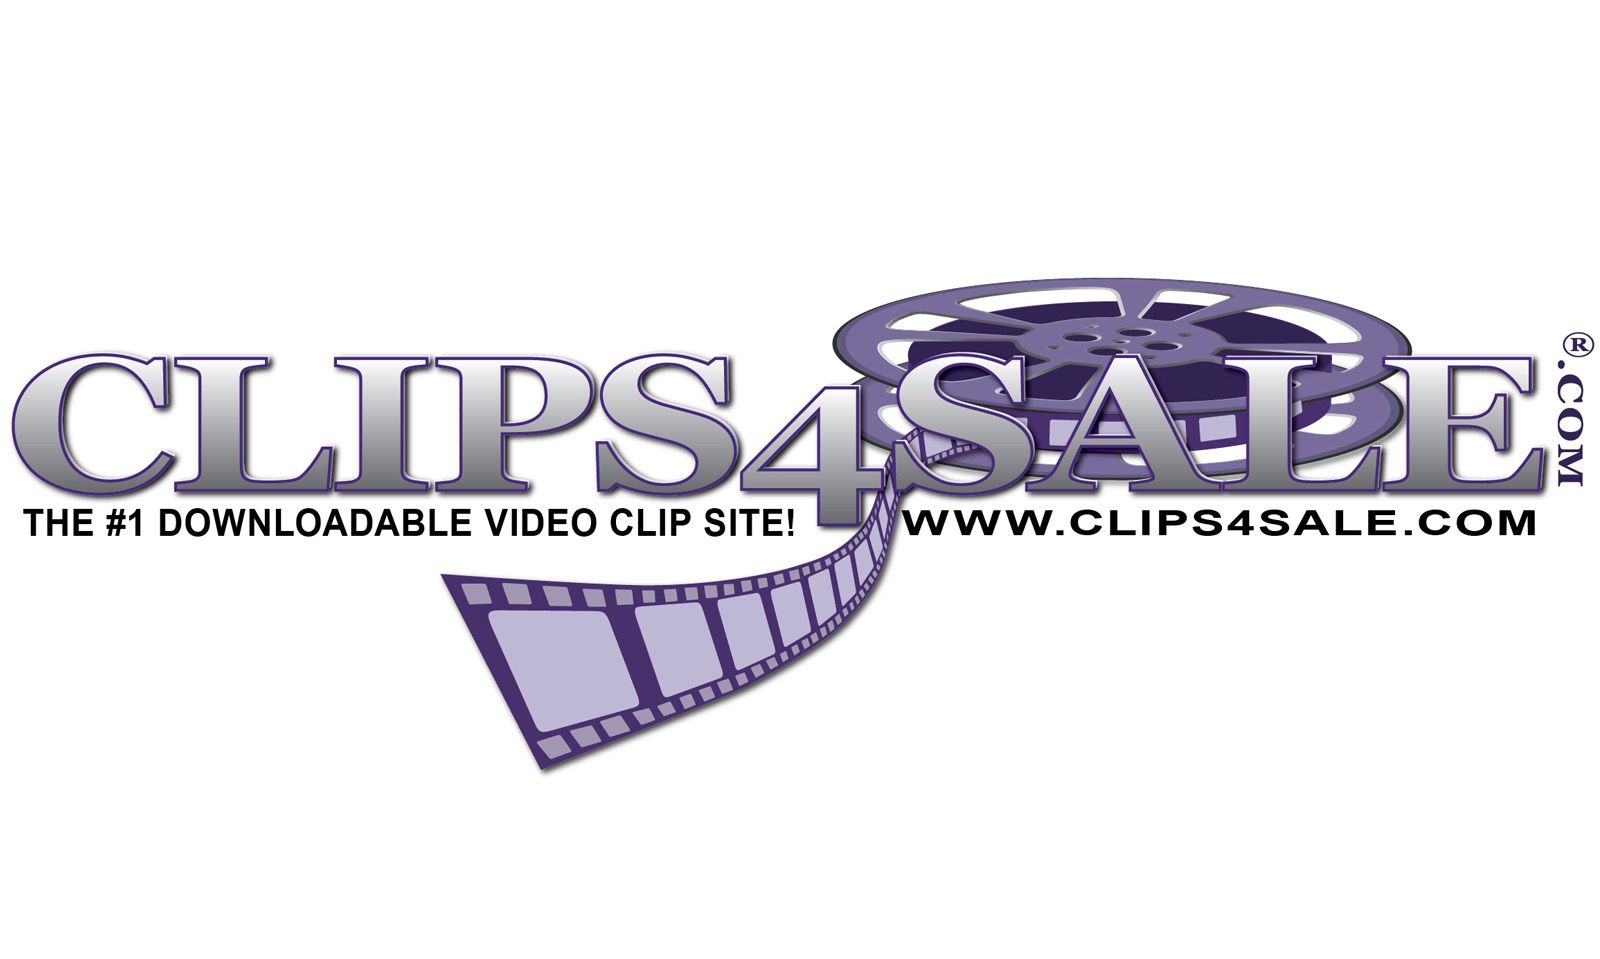 'Not for Sale,' Says Clips4Sale